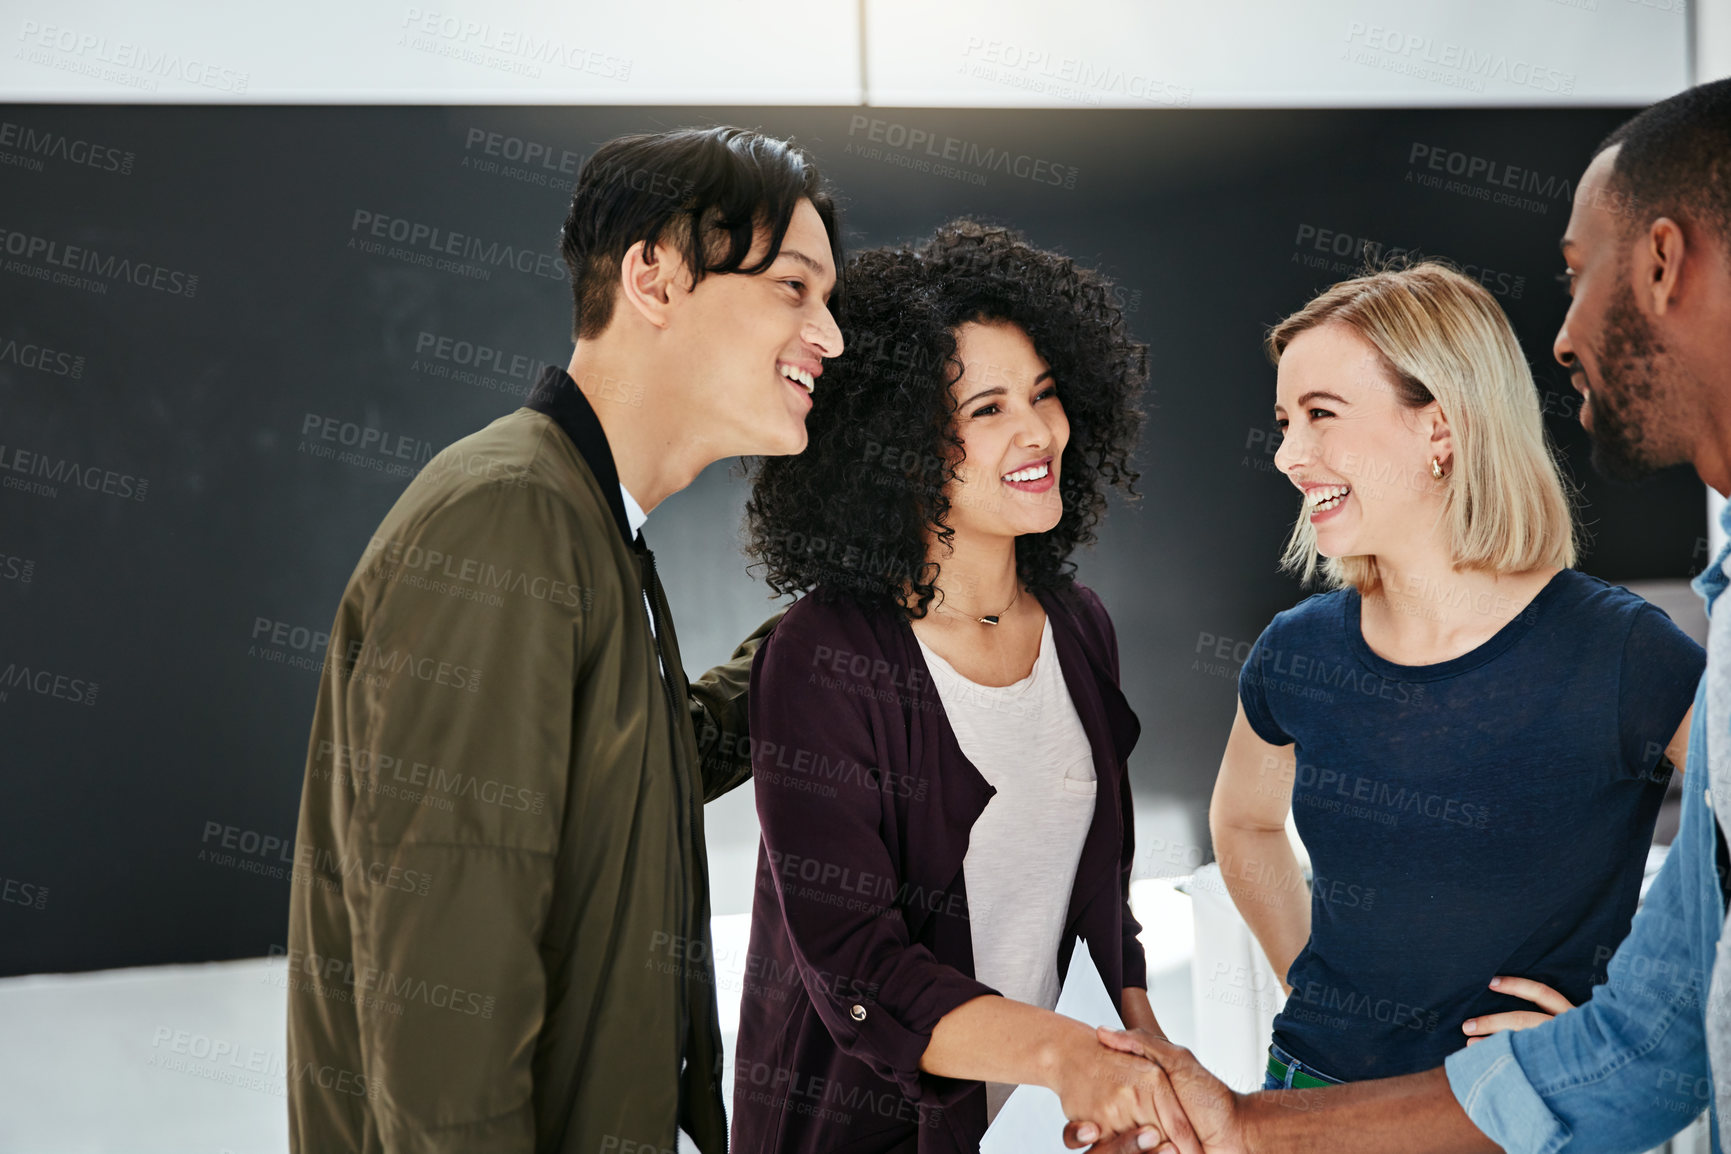 Buy stock photo A handshake, agreement and greeting of a group of students in a building. Young and diverse people or friends meeting and handshaking to welcome each other after a successful deal